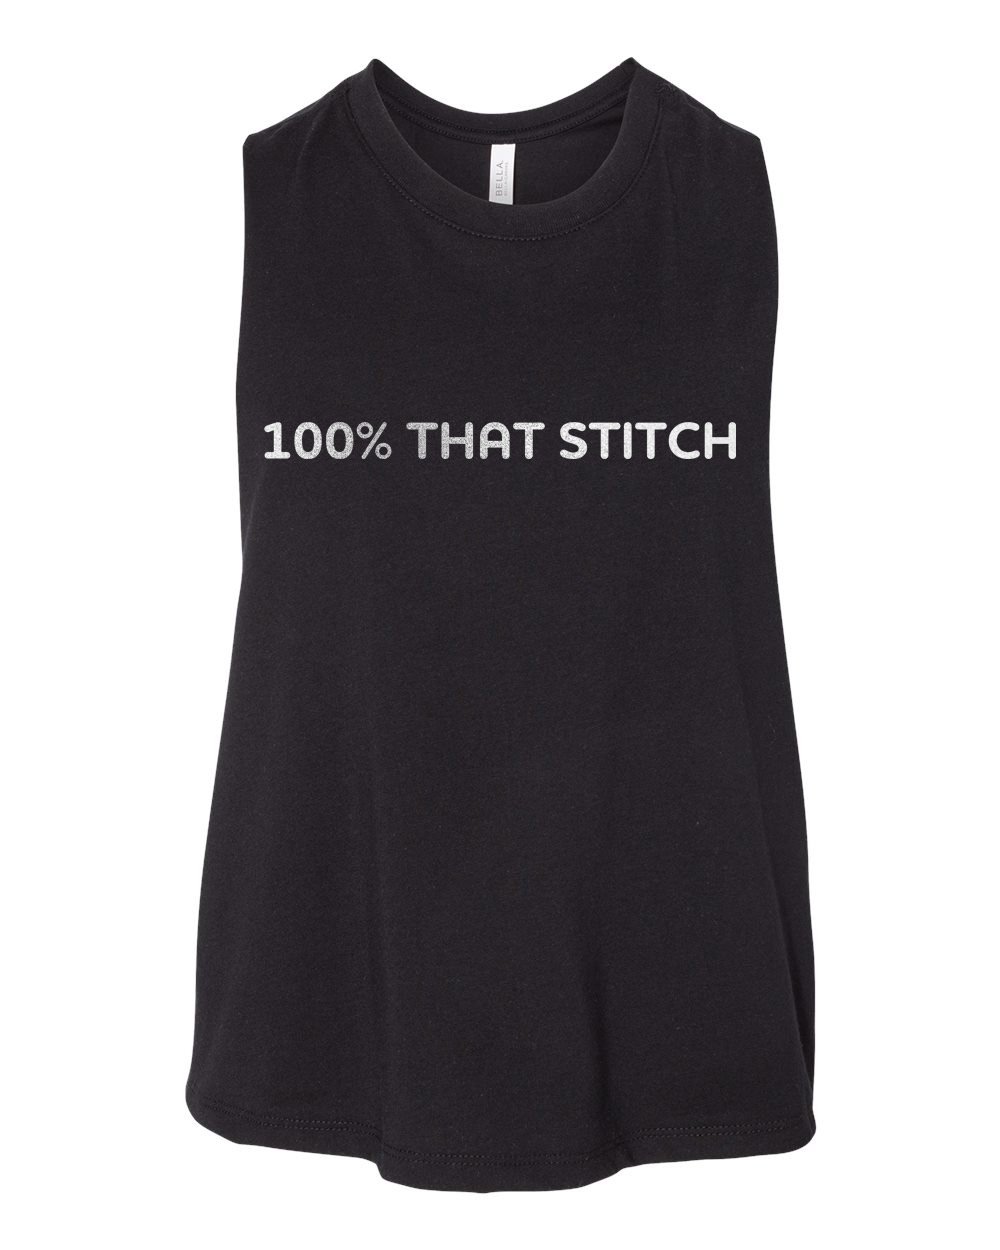 Image of 100% THAT STITCH Cropped Tank